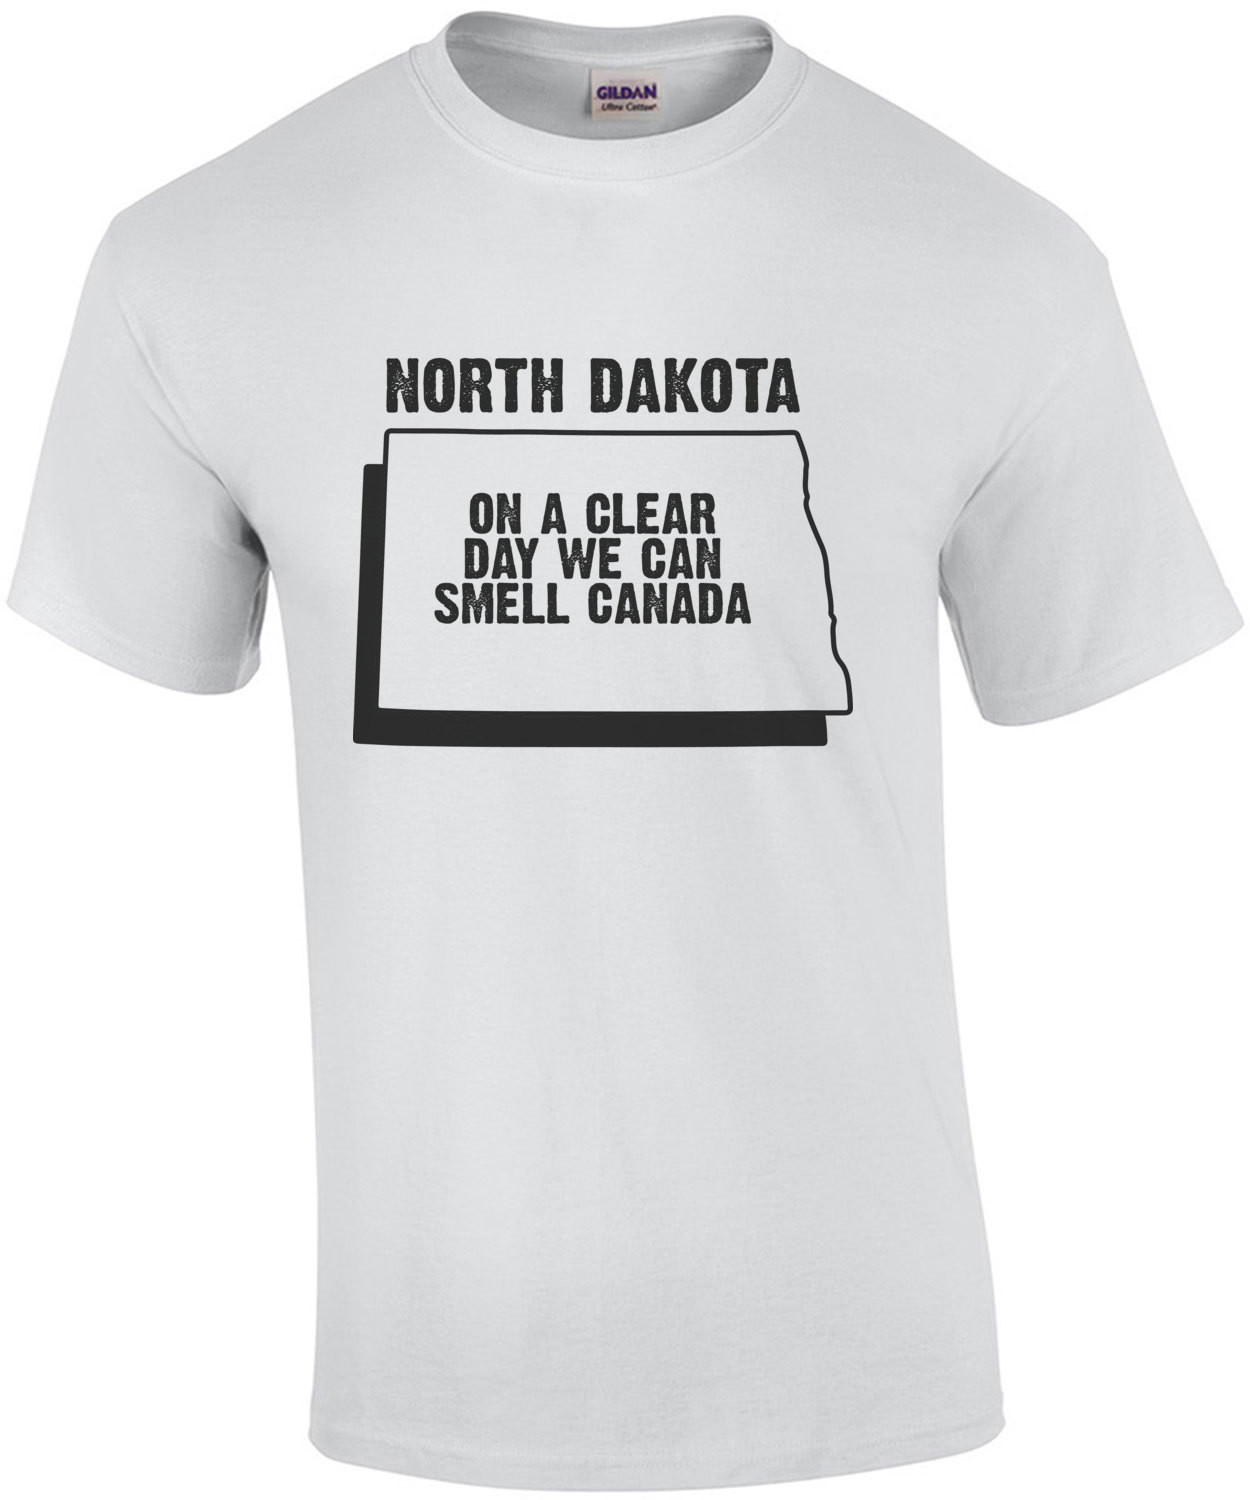 North Dakota - on a clear day we can smell Canads - North Dakota T-Shirt